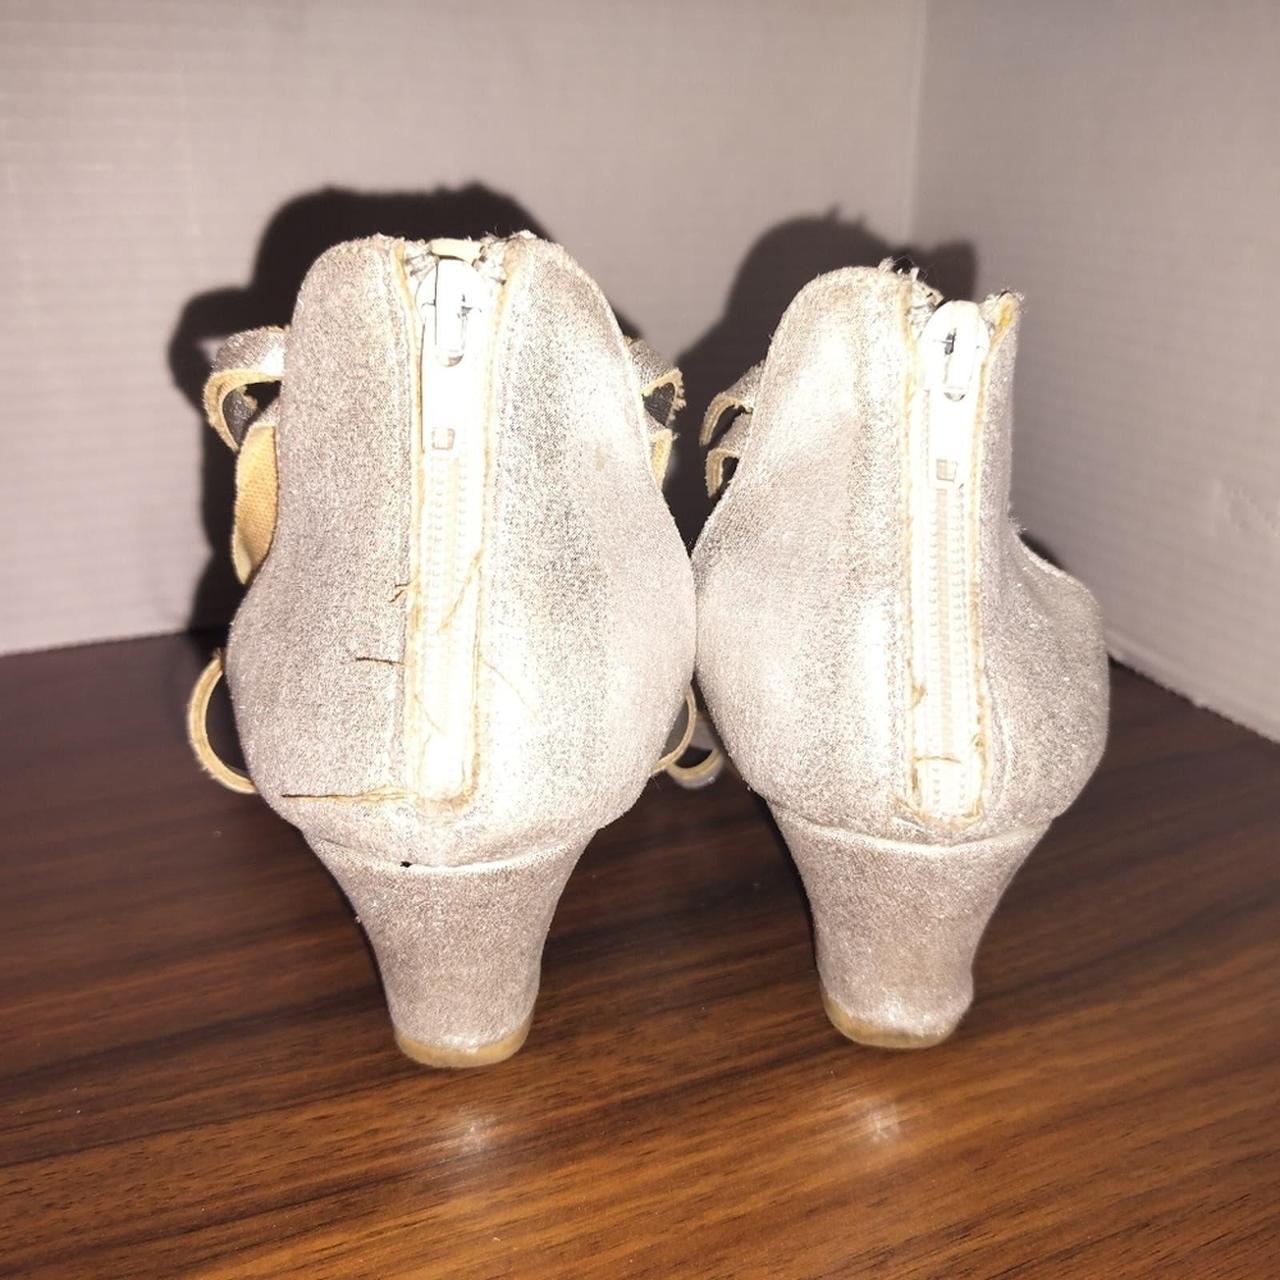 Silver Steve Madden Wedges in Size 5. These wedges... - Depop